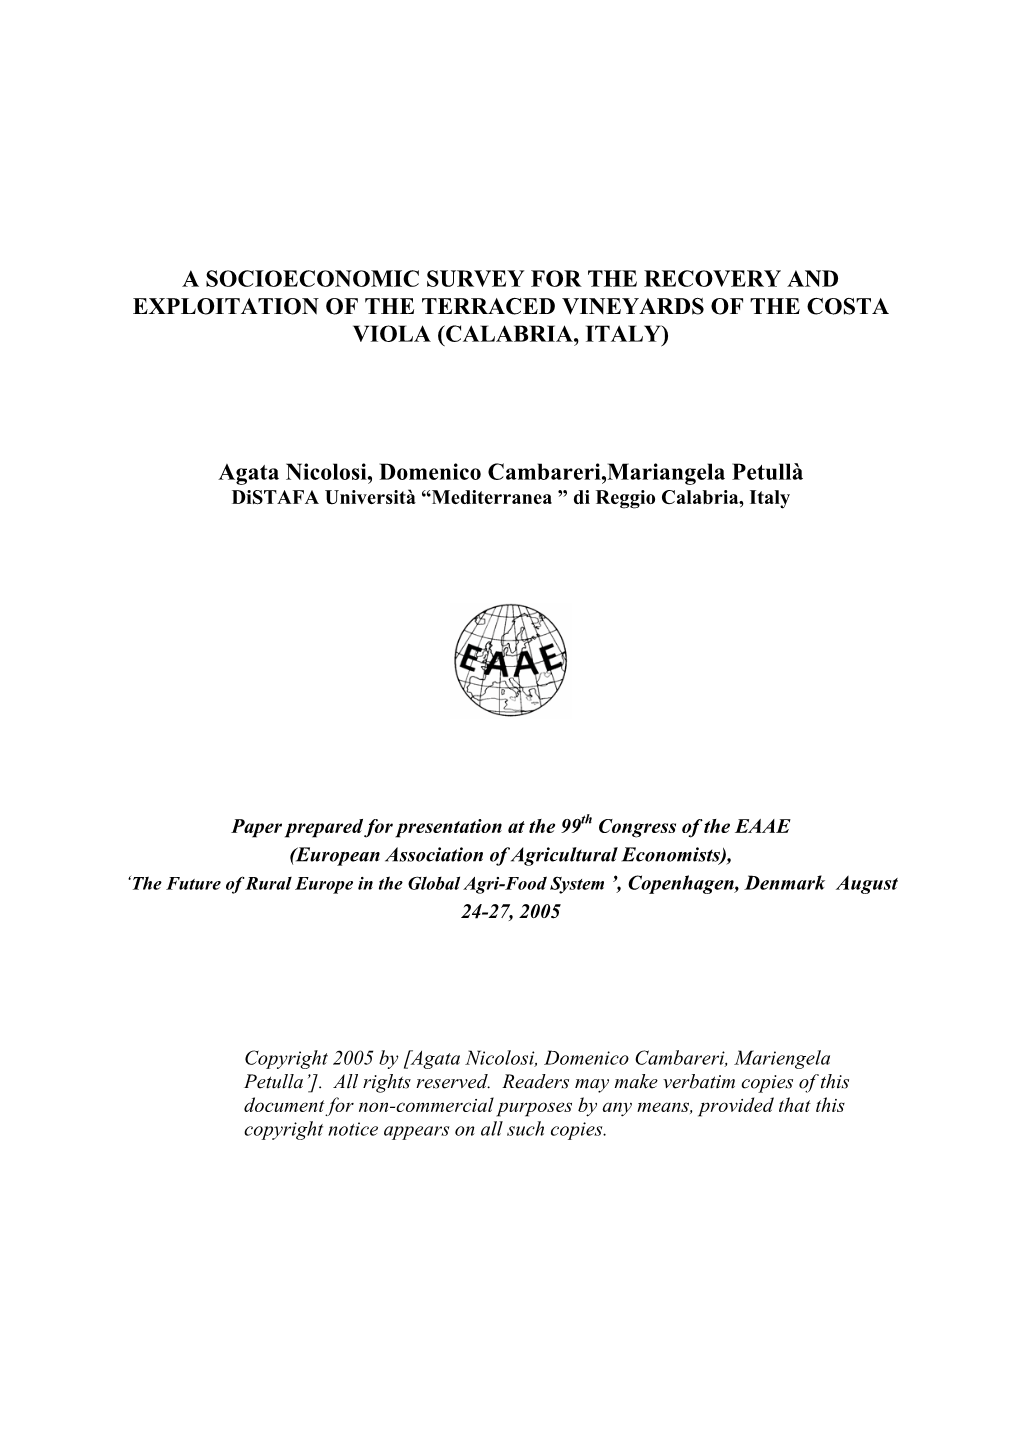 A Socioeconomic Survey for the Recovery and Exploitation of the Terraced Vineyards of the Costa Viola (Calabria, Italy)